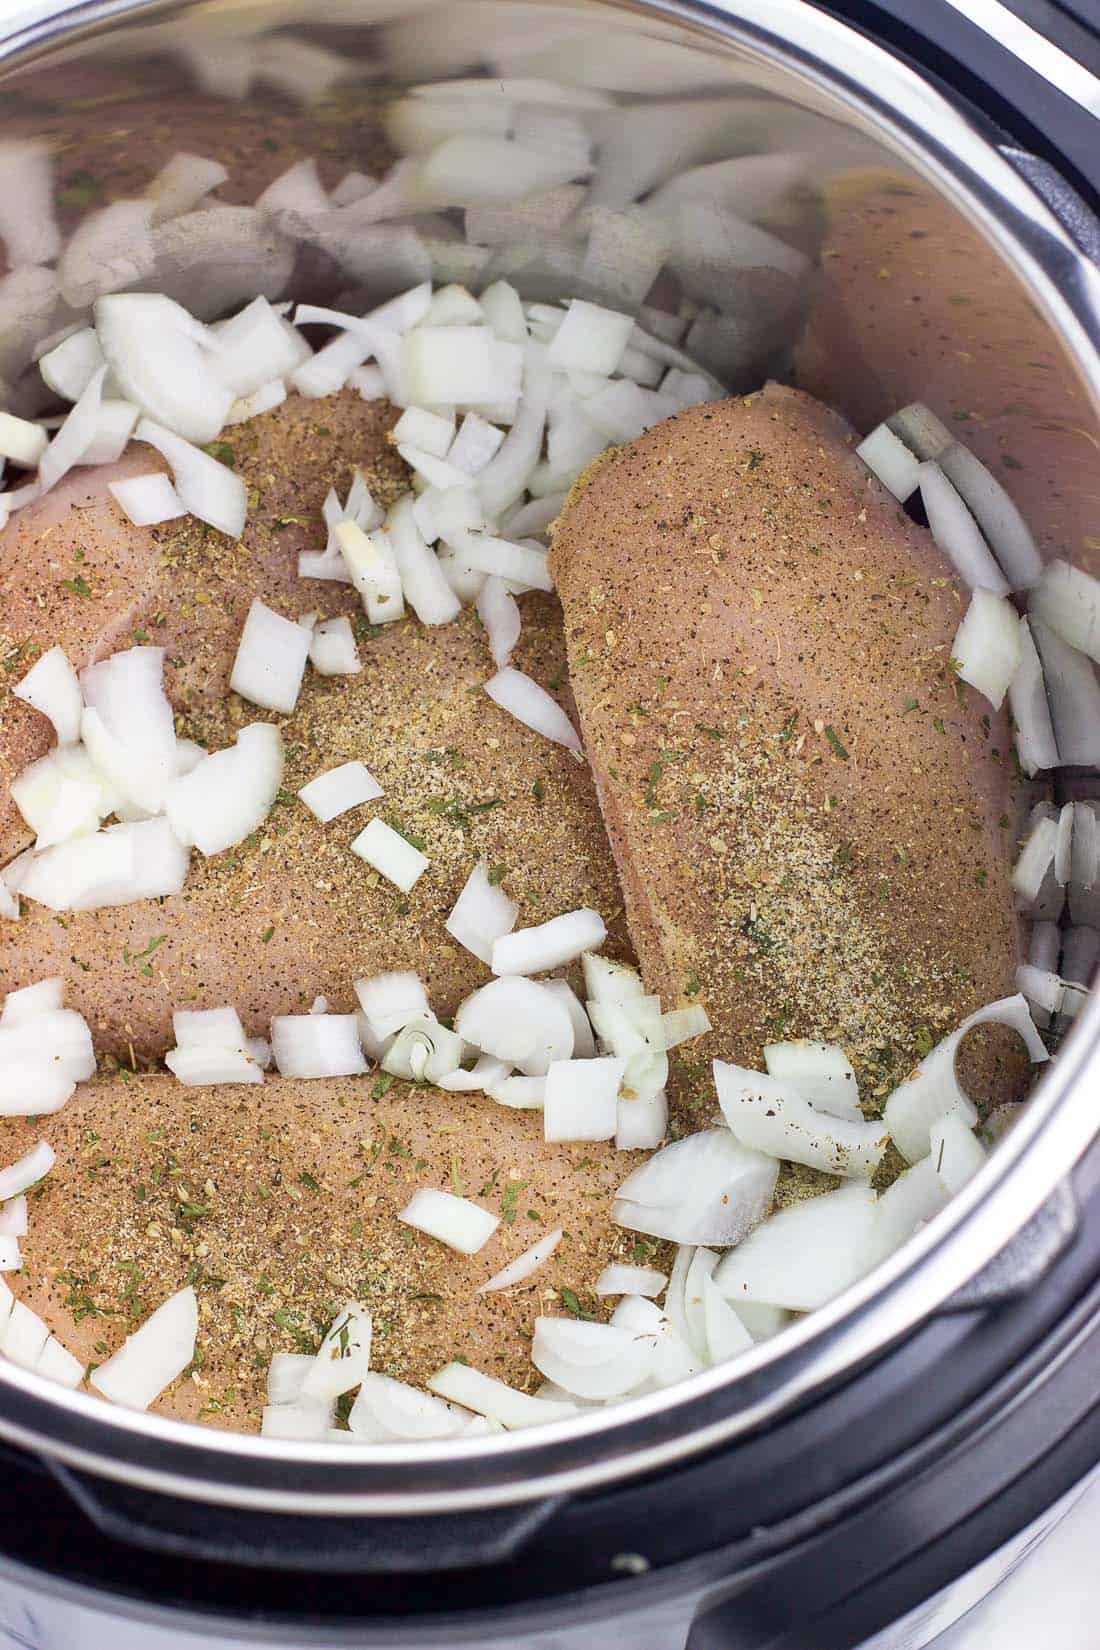 Raw chicken breasts, diced onion, and seasonings in the Instant Pot.